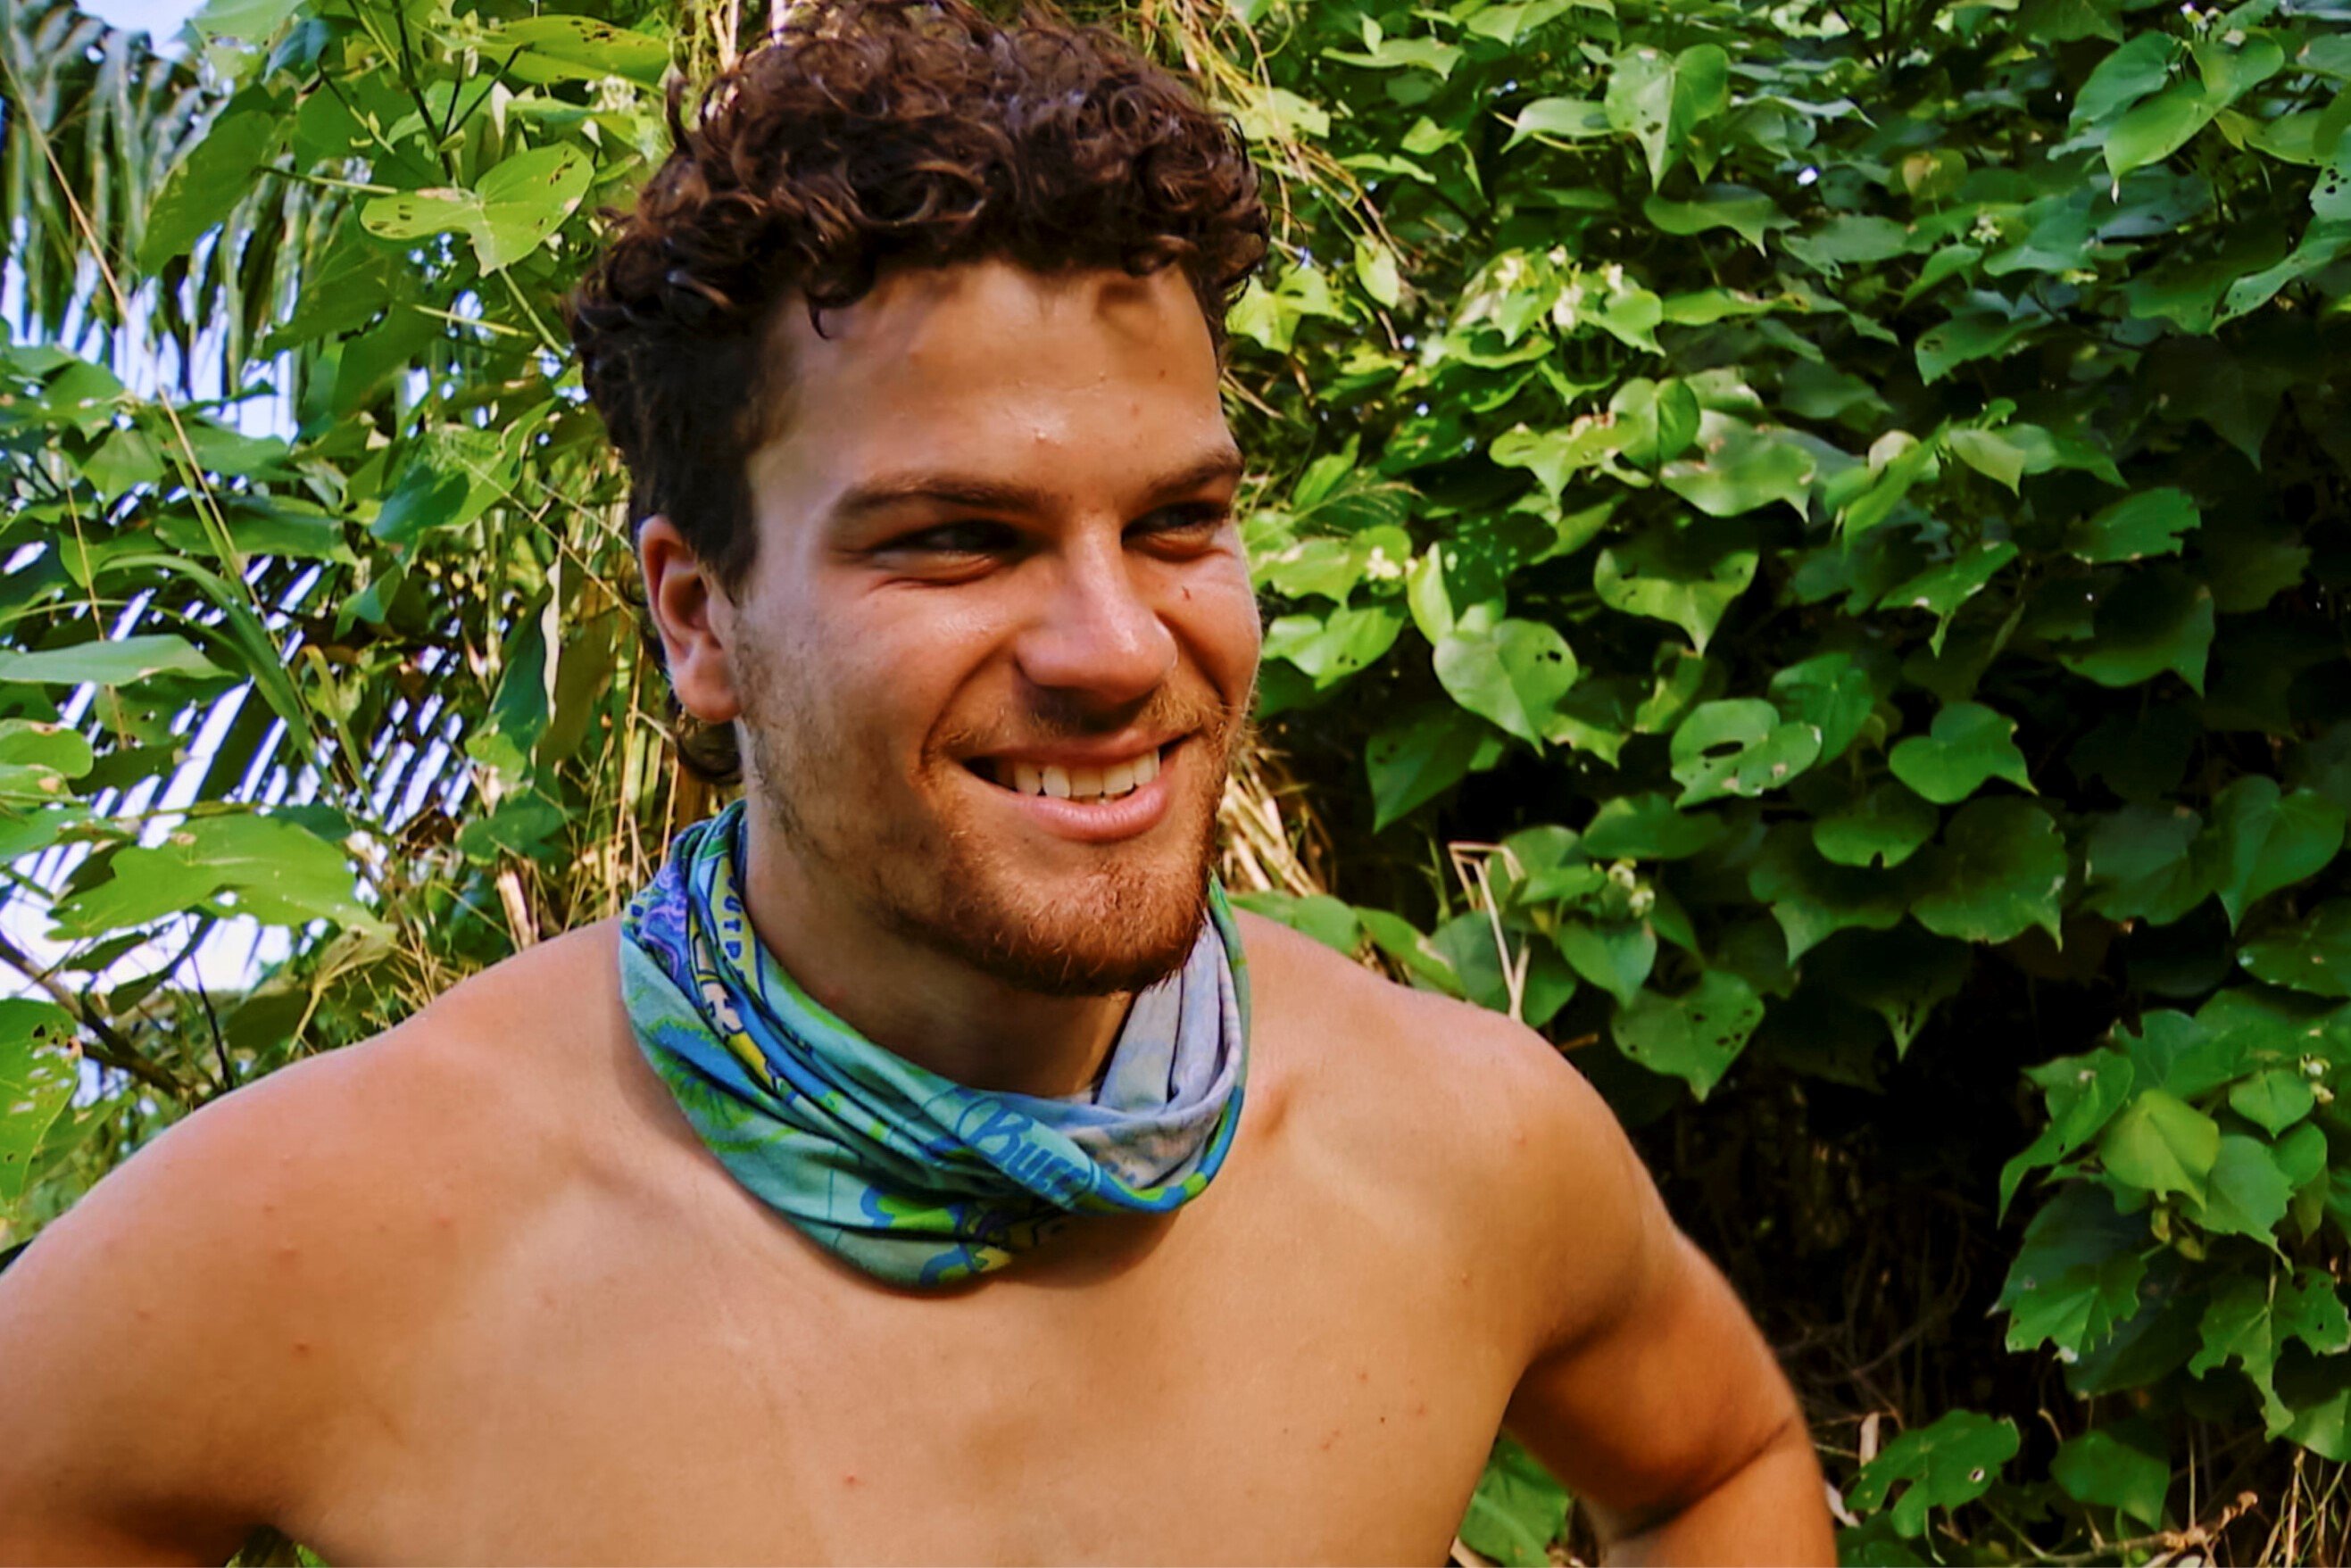 Sami Layadi, who didn't find any idols in 'Survivor' Season 43, wears his light blue and green buff around his neck.